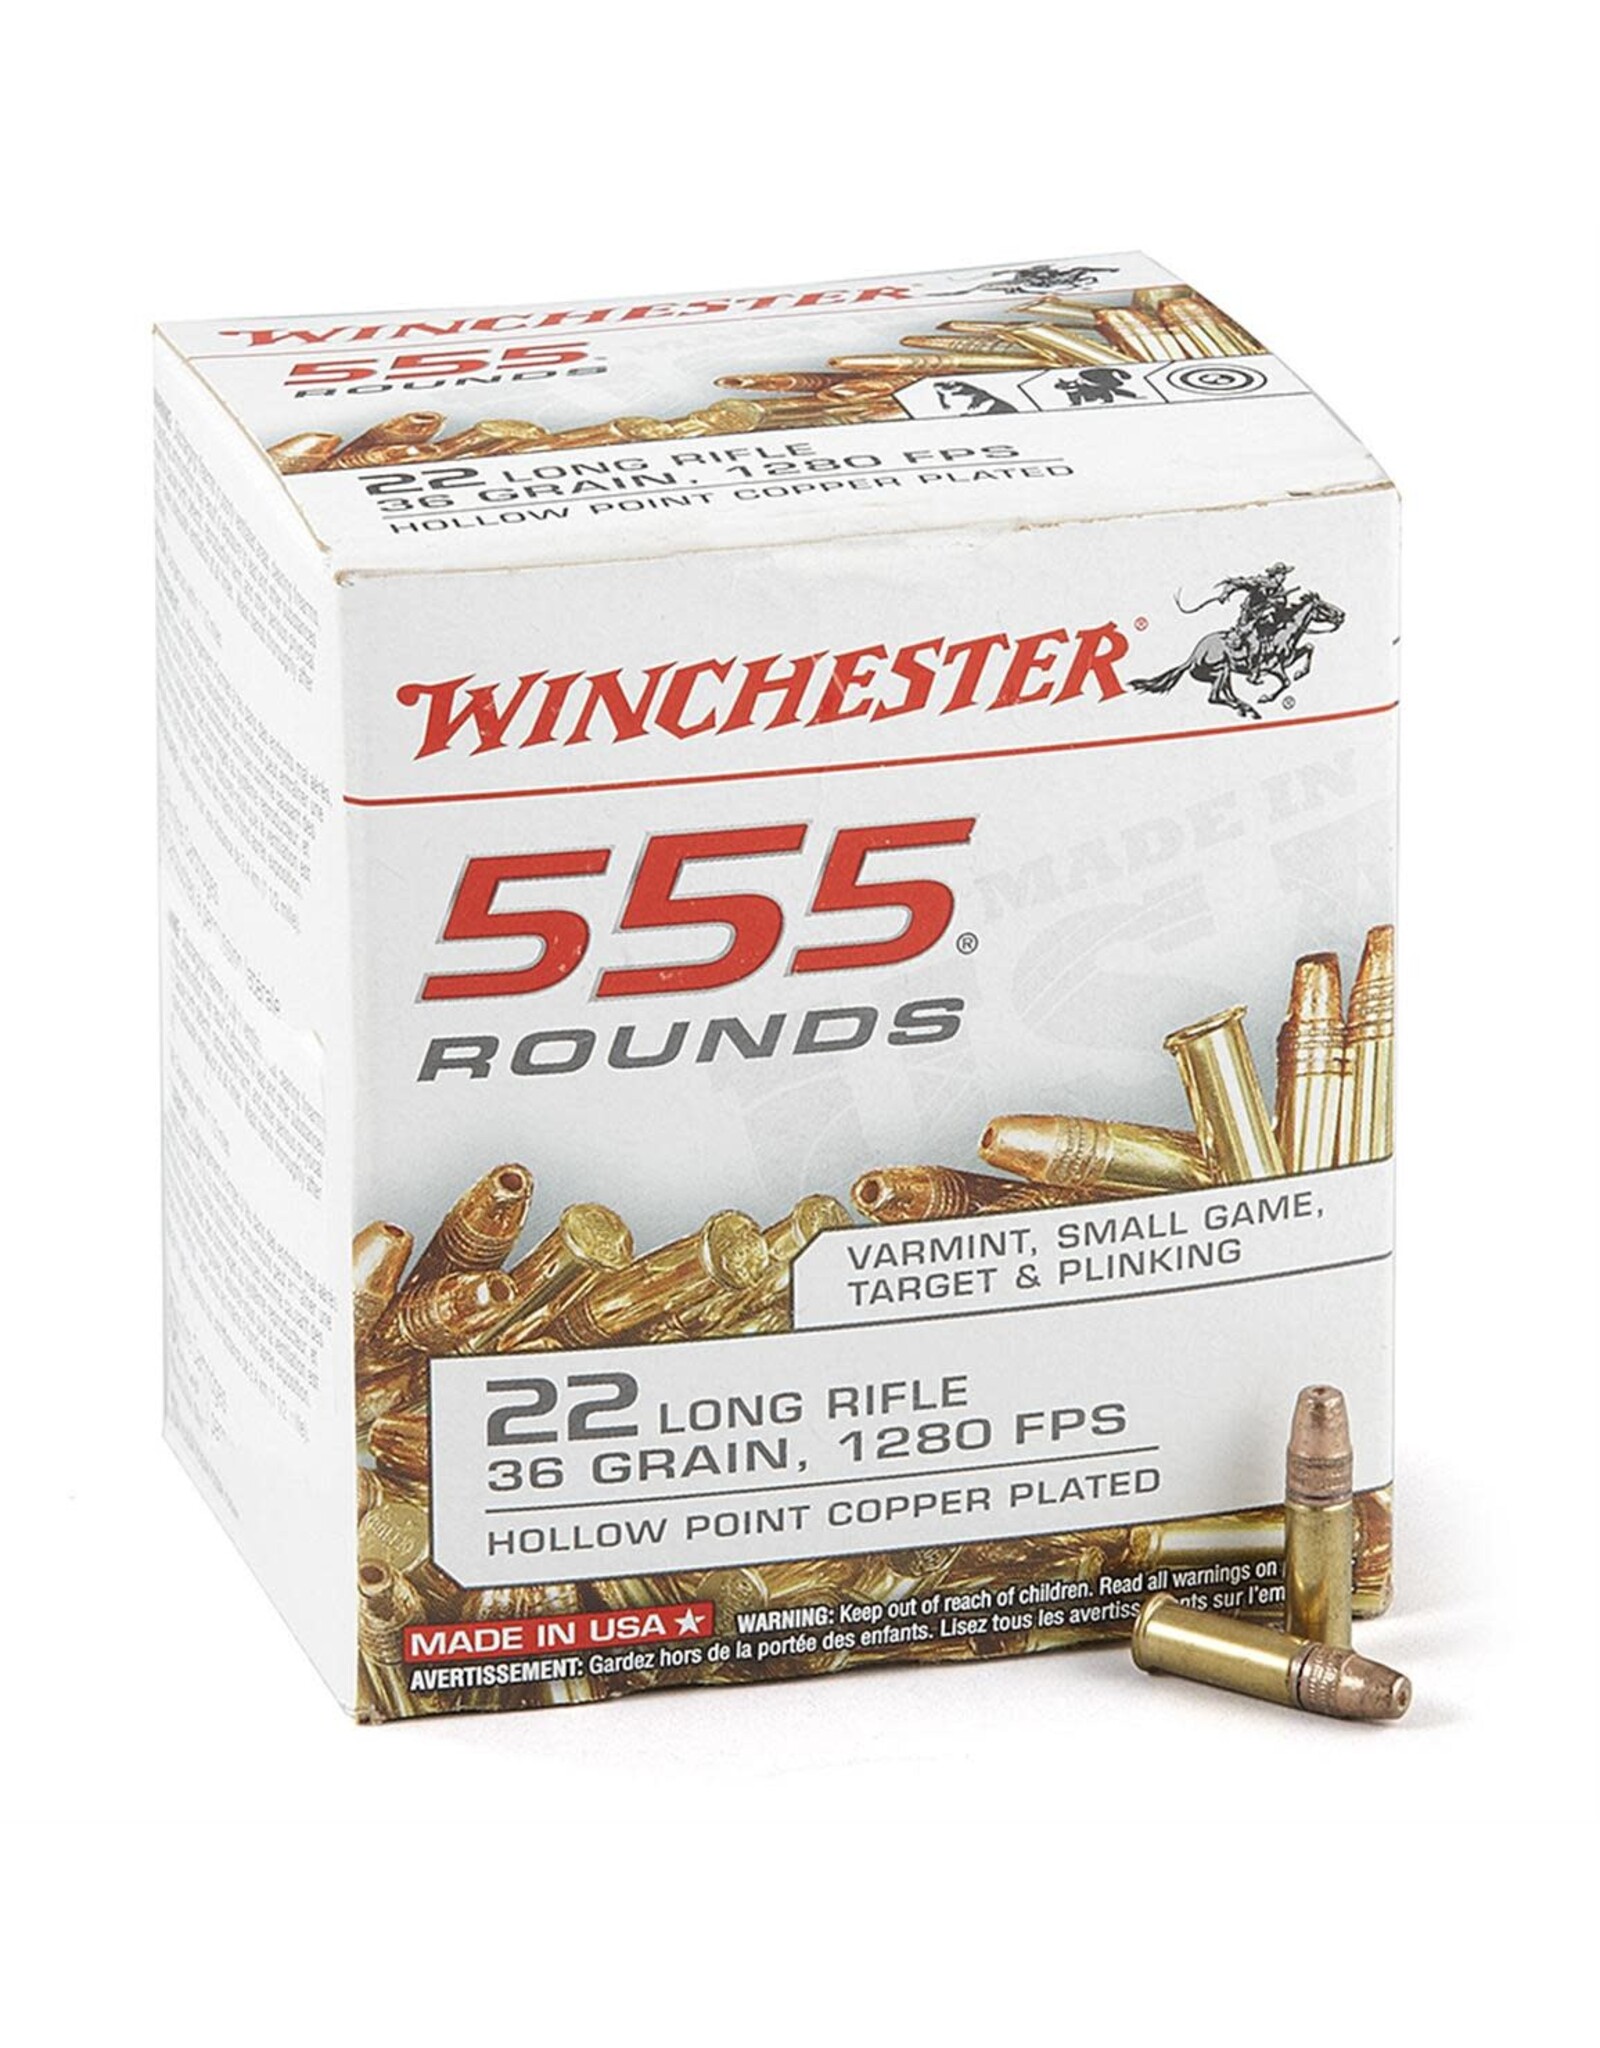 Winchester WINCHESTER 22 LR 36 GRAIN 1280 FPS HOLLOW POINT COPPER PLATED 555 ROUNDS